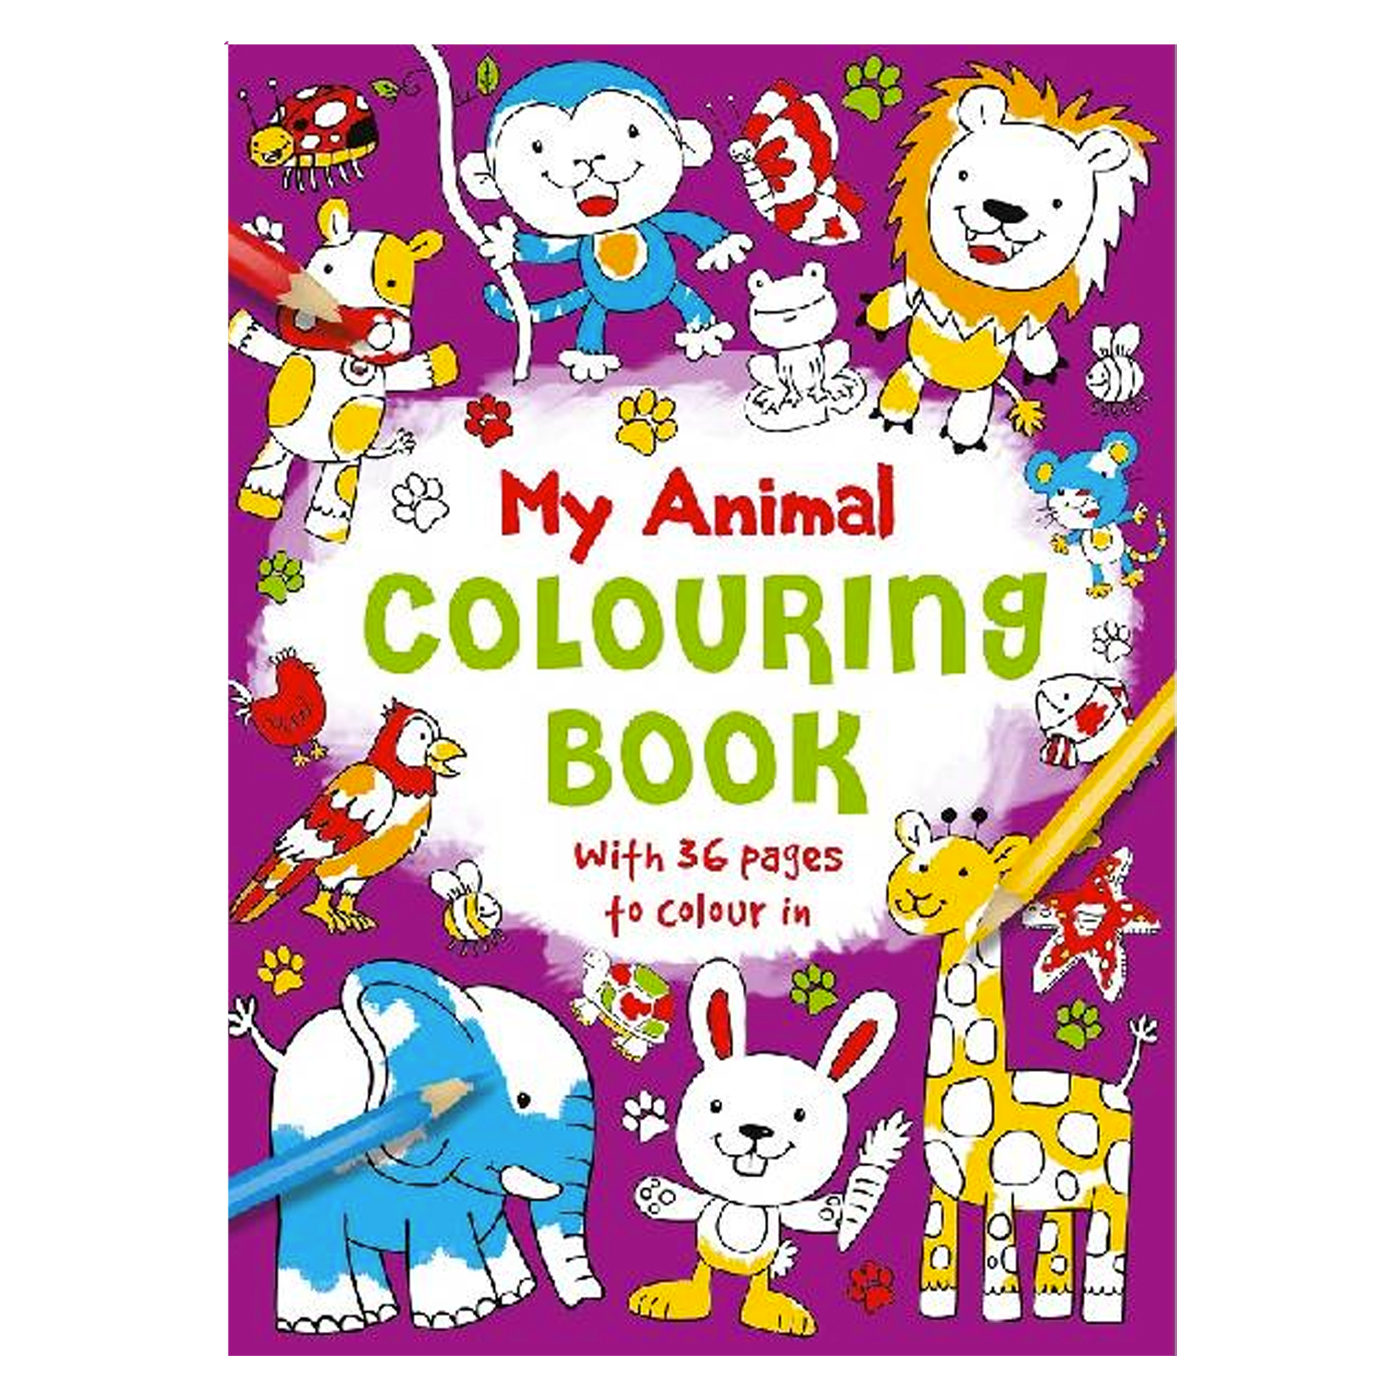  My Animal Colouring Book